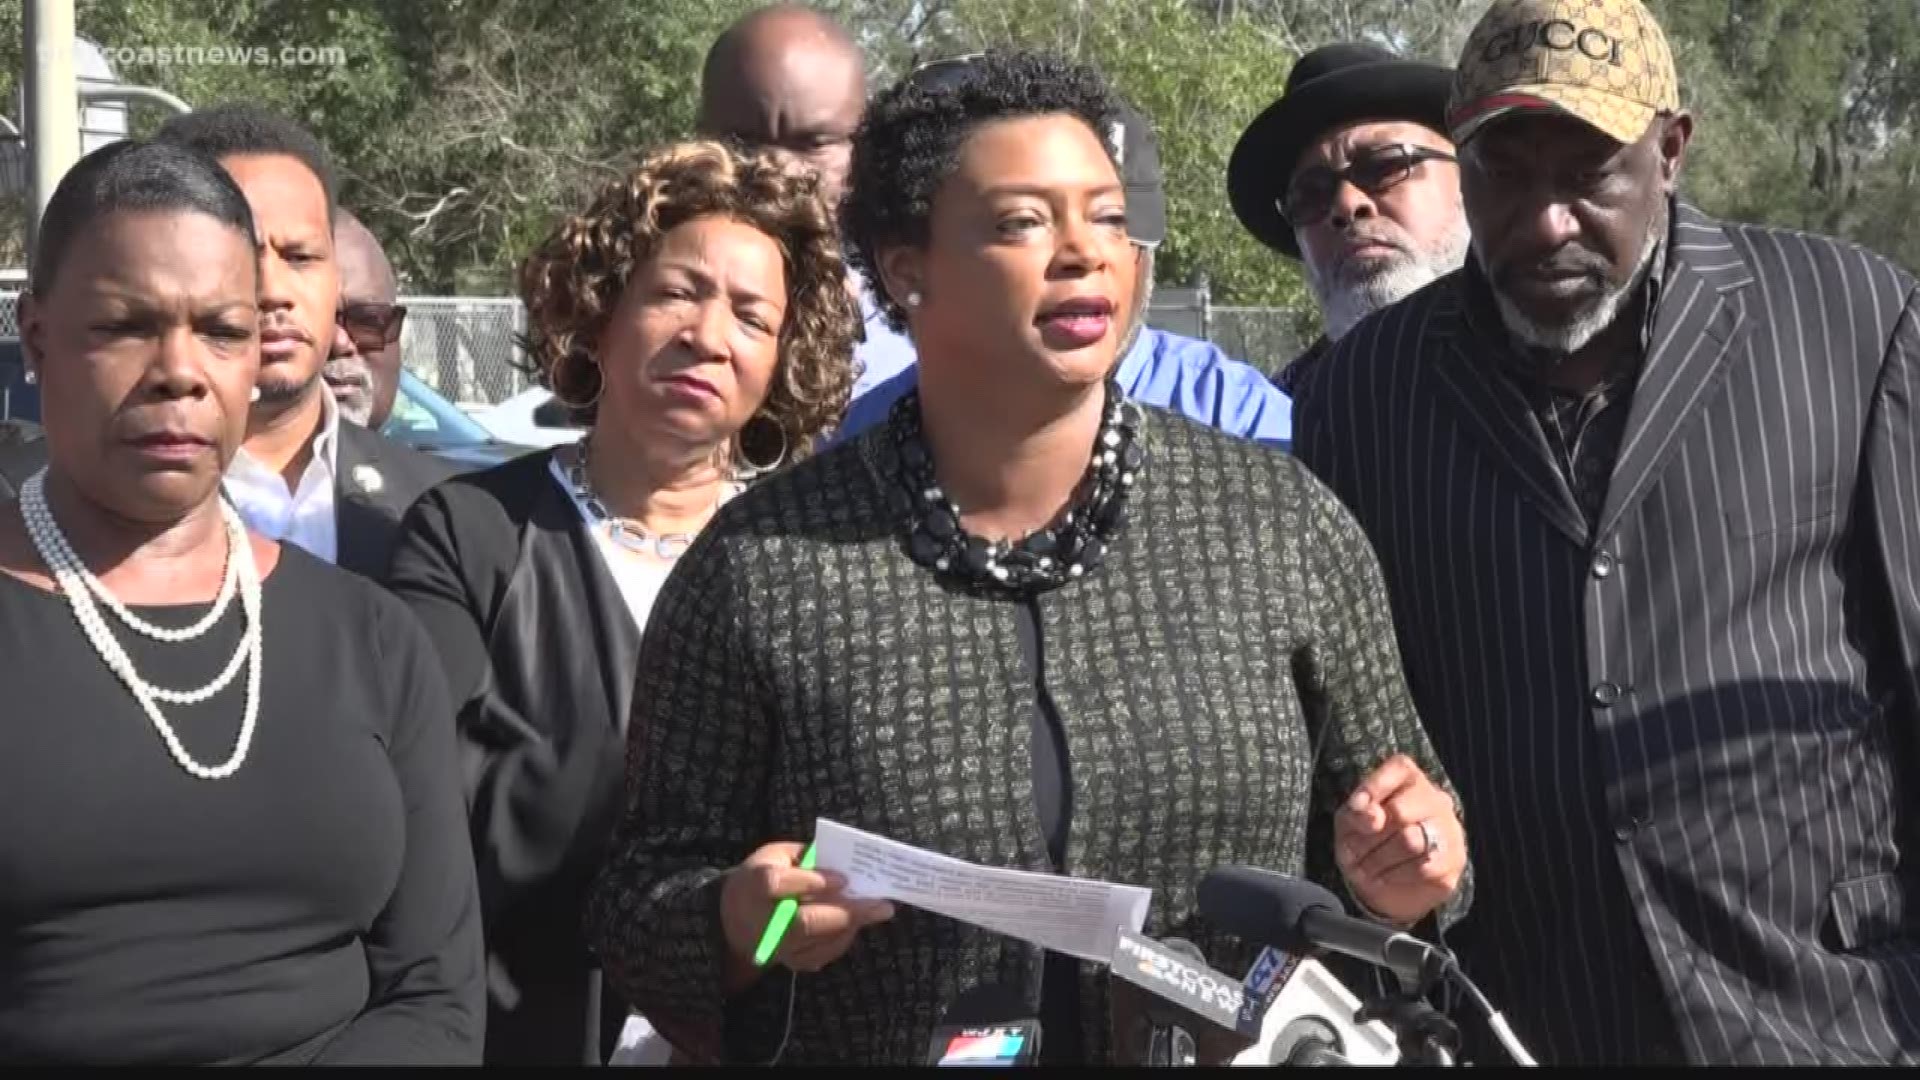 State leaders said "enough is enough" after a string of shootings occur over just two days in Jacksonville.